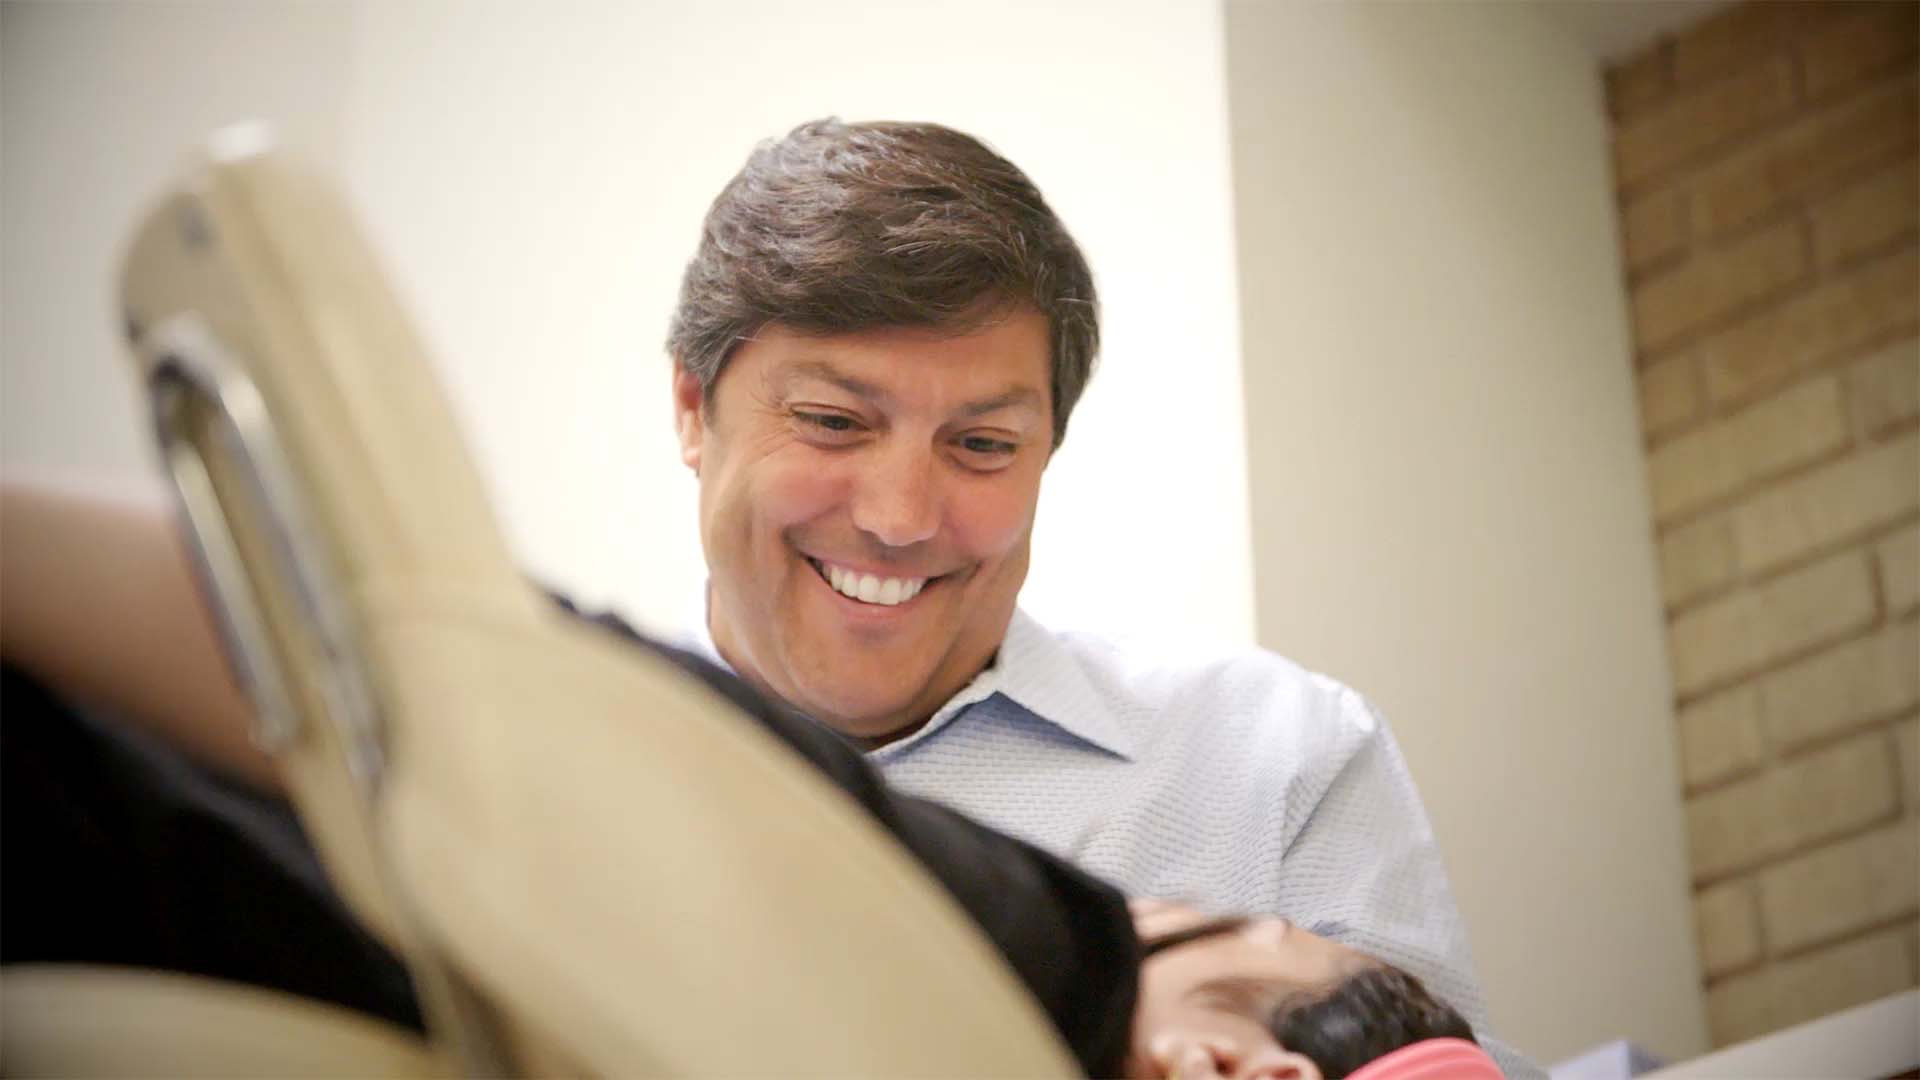 Dr Stefen Lippitz smiles while examining a patient from Wilmette